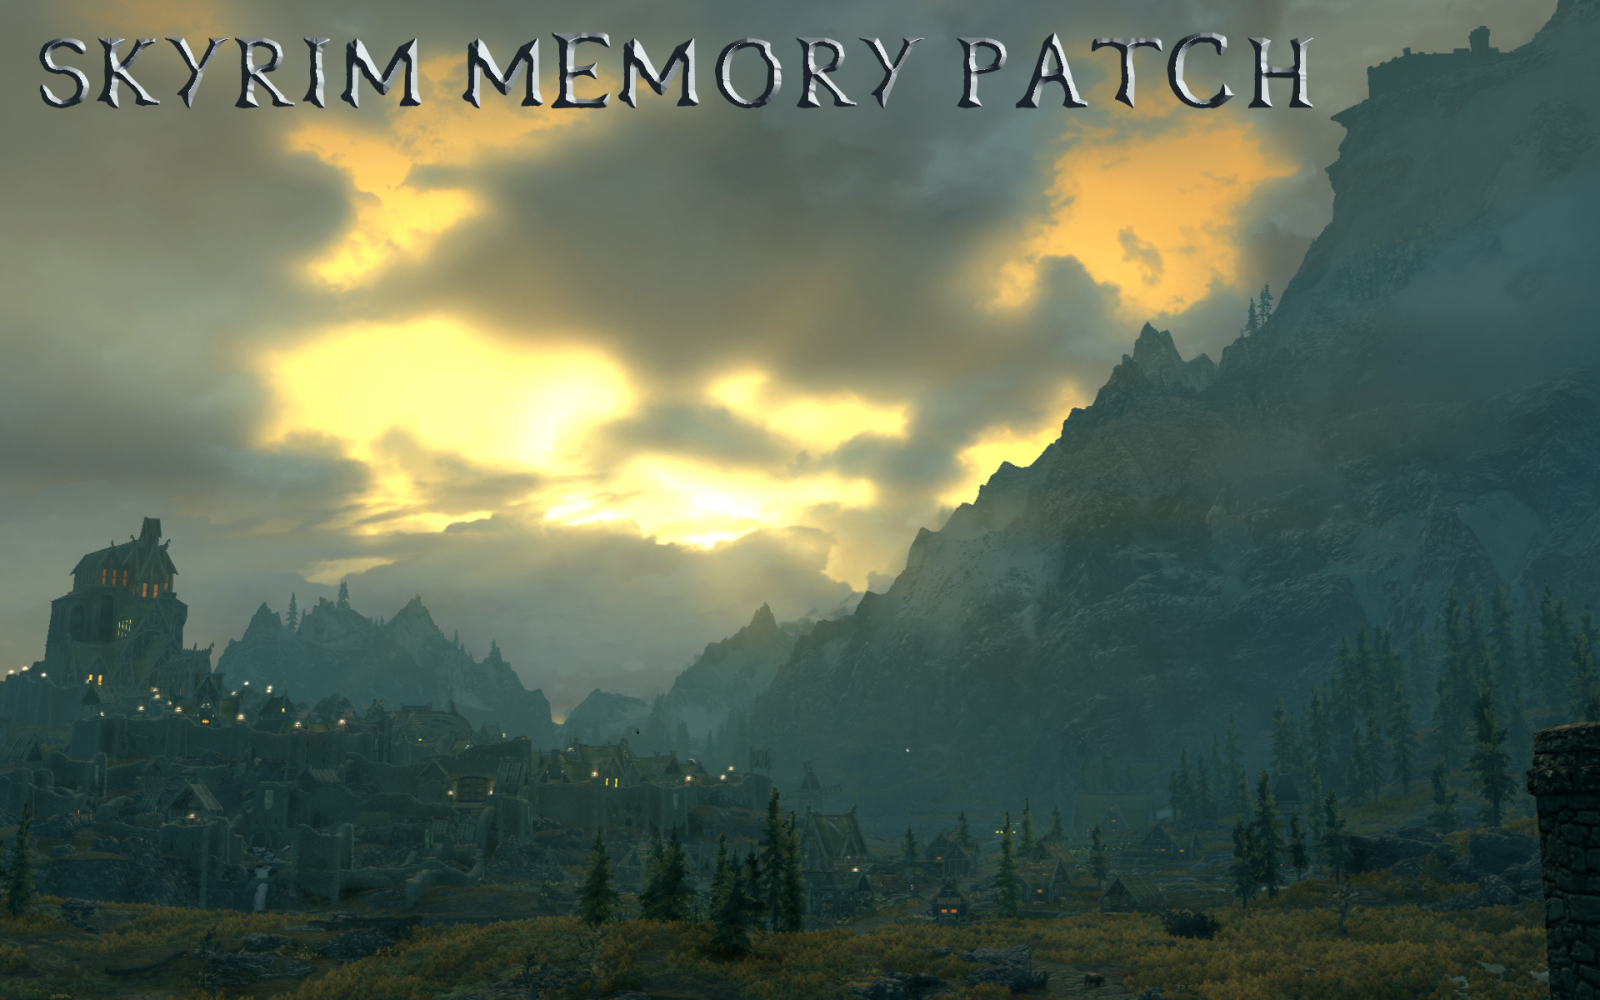 The ‘Sky is the Limit’ with the Skyrim Memory Patch, Just Don’t Crash